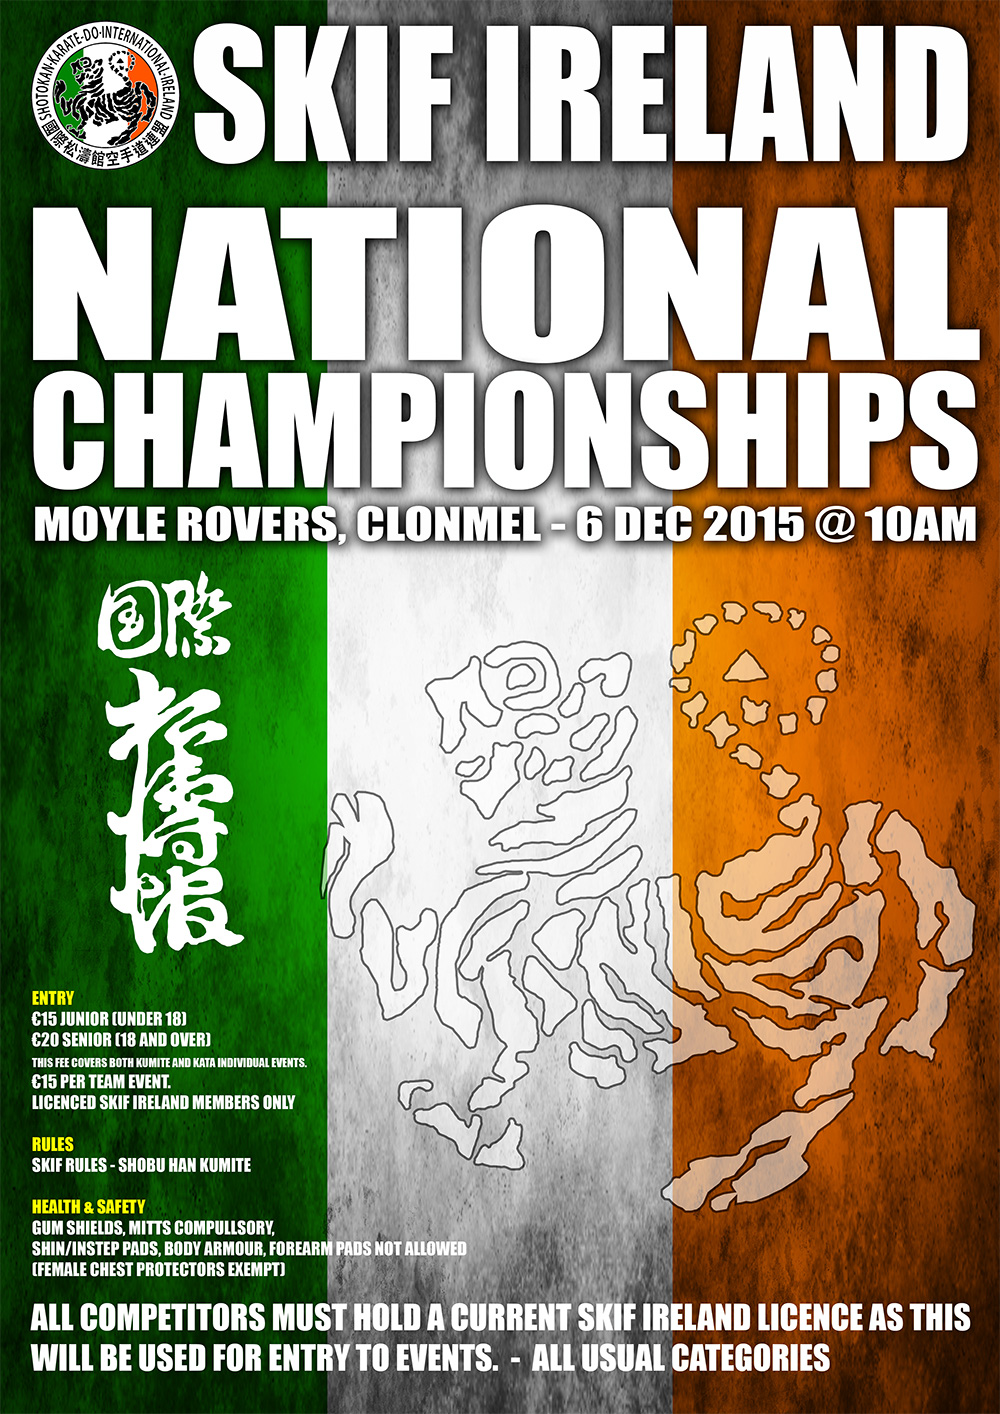 The SKIF Ireland National Championships 2015 will take place in Moyle Rovers GAA on December 6th 2015